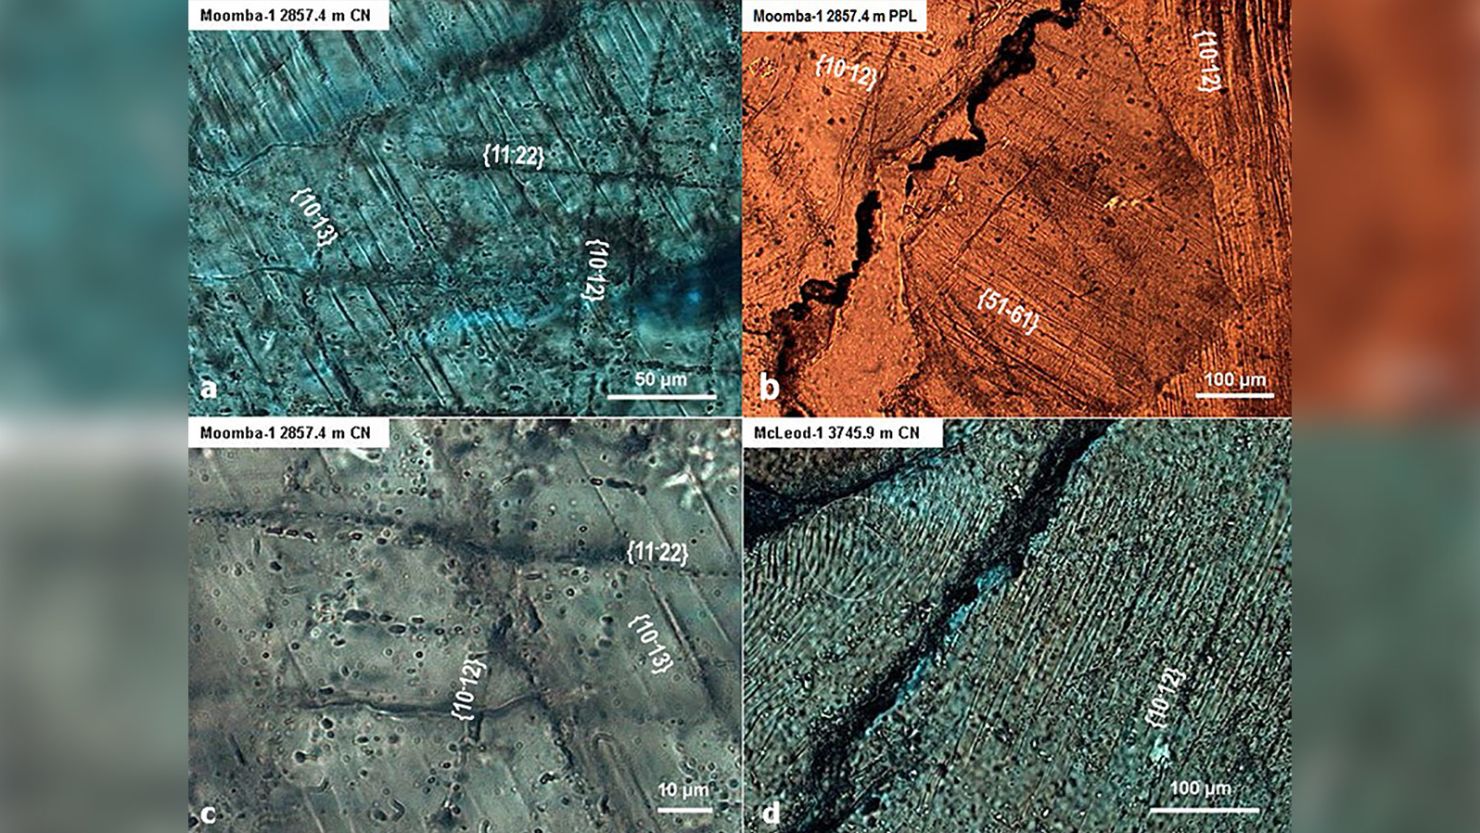 Imaging taken from rock along the border of South Australia and the Northern Territory shows evidence of a massive impact.